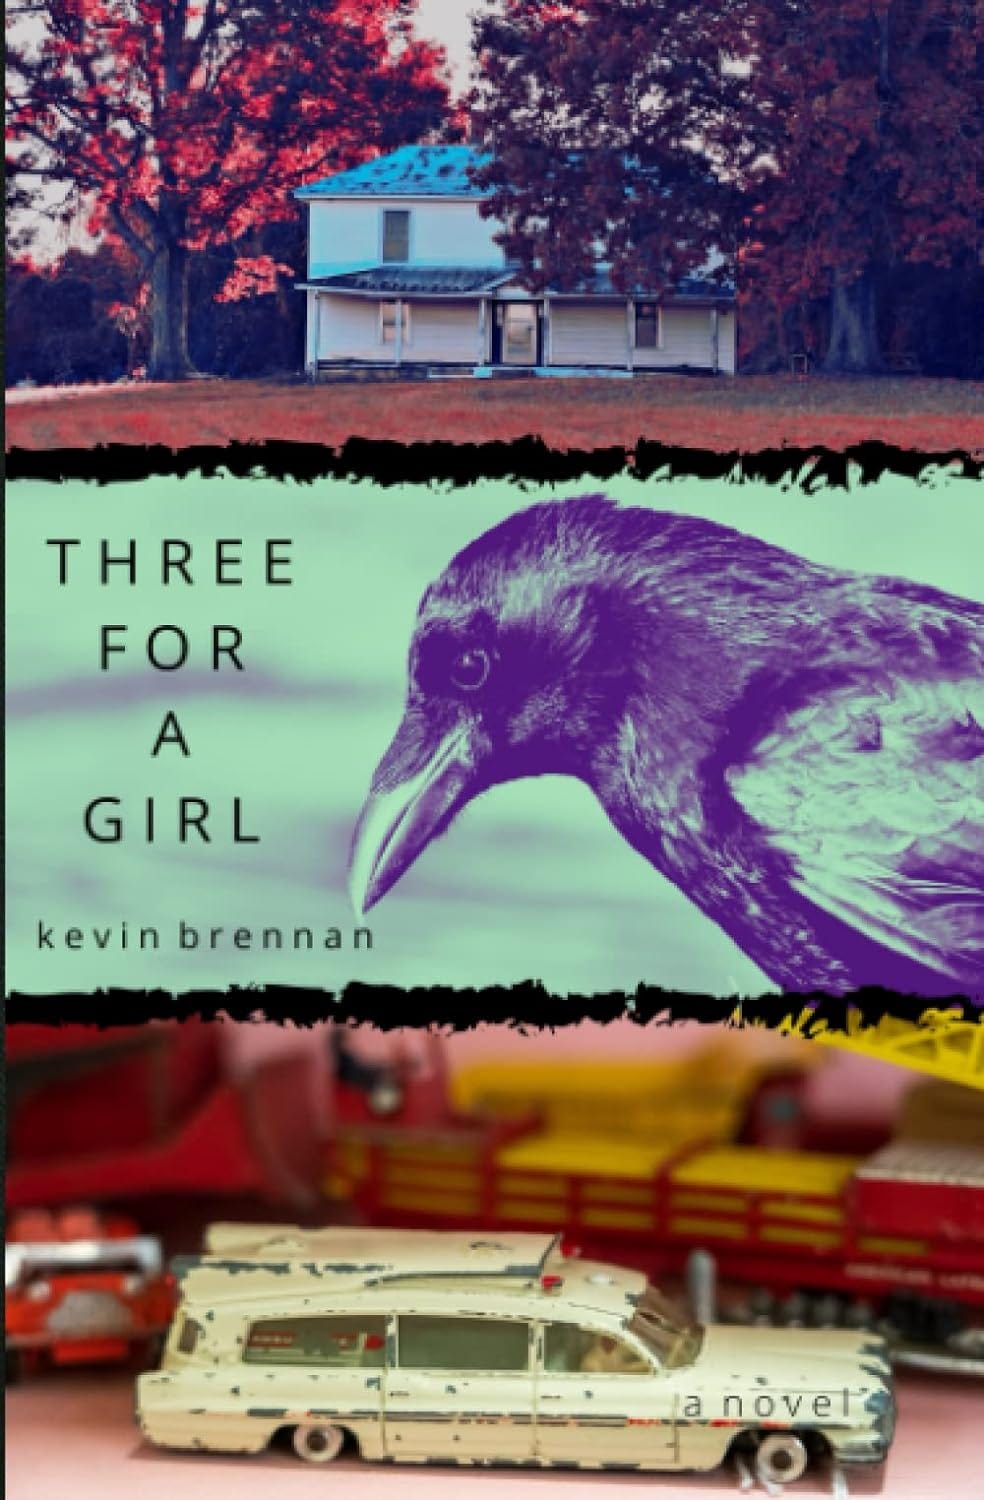 Book cover in thirds: upper, a two-story house; middle, a crow; bottom, a Cadillac turned into an ambulance.